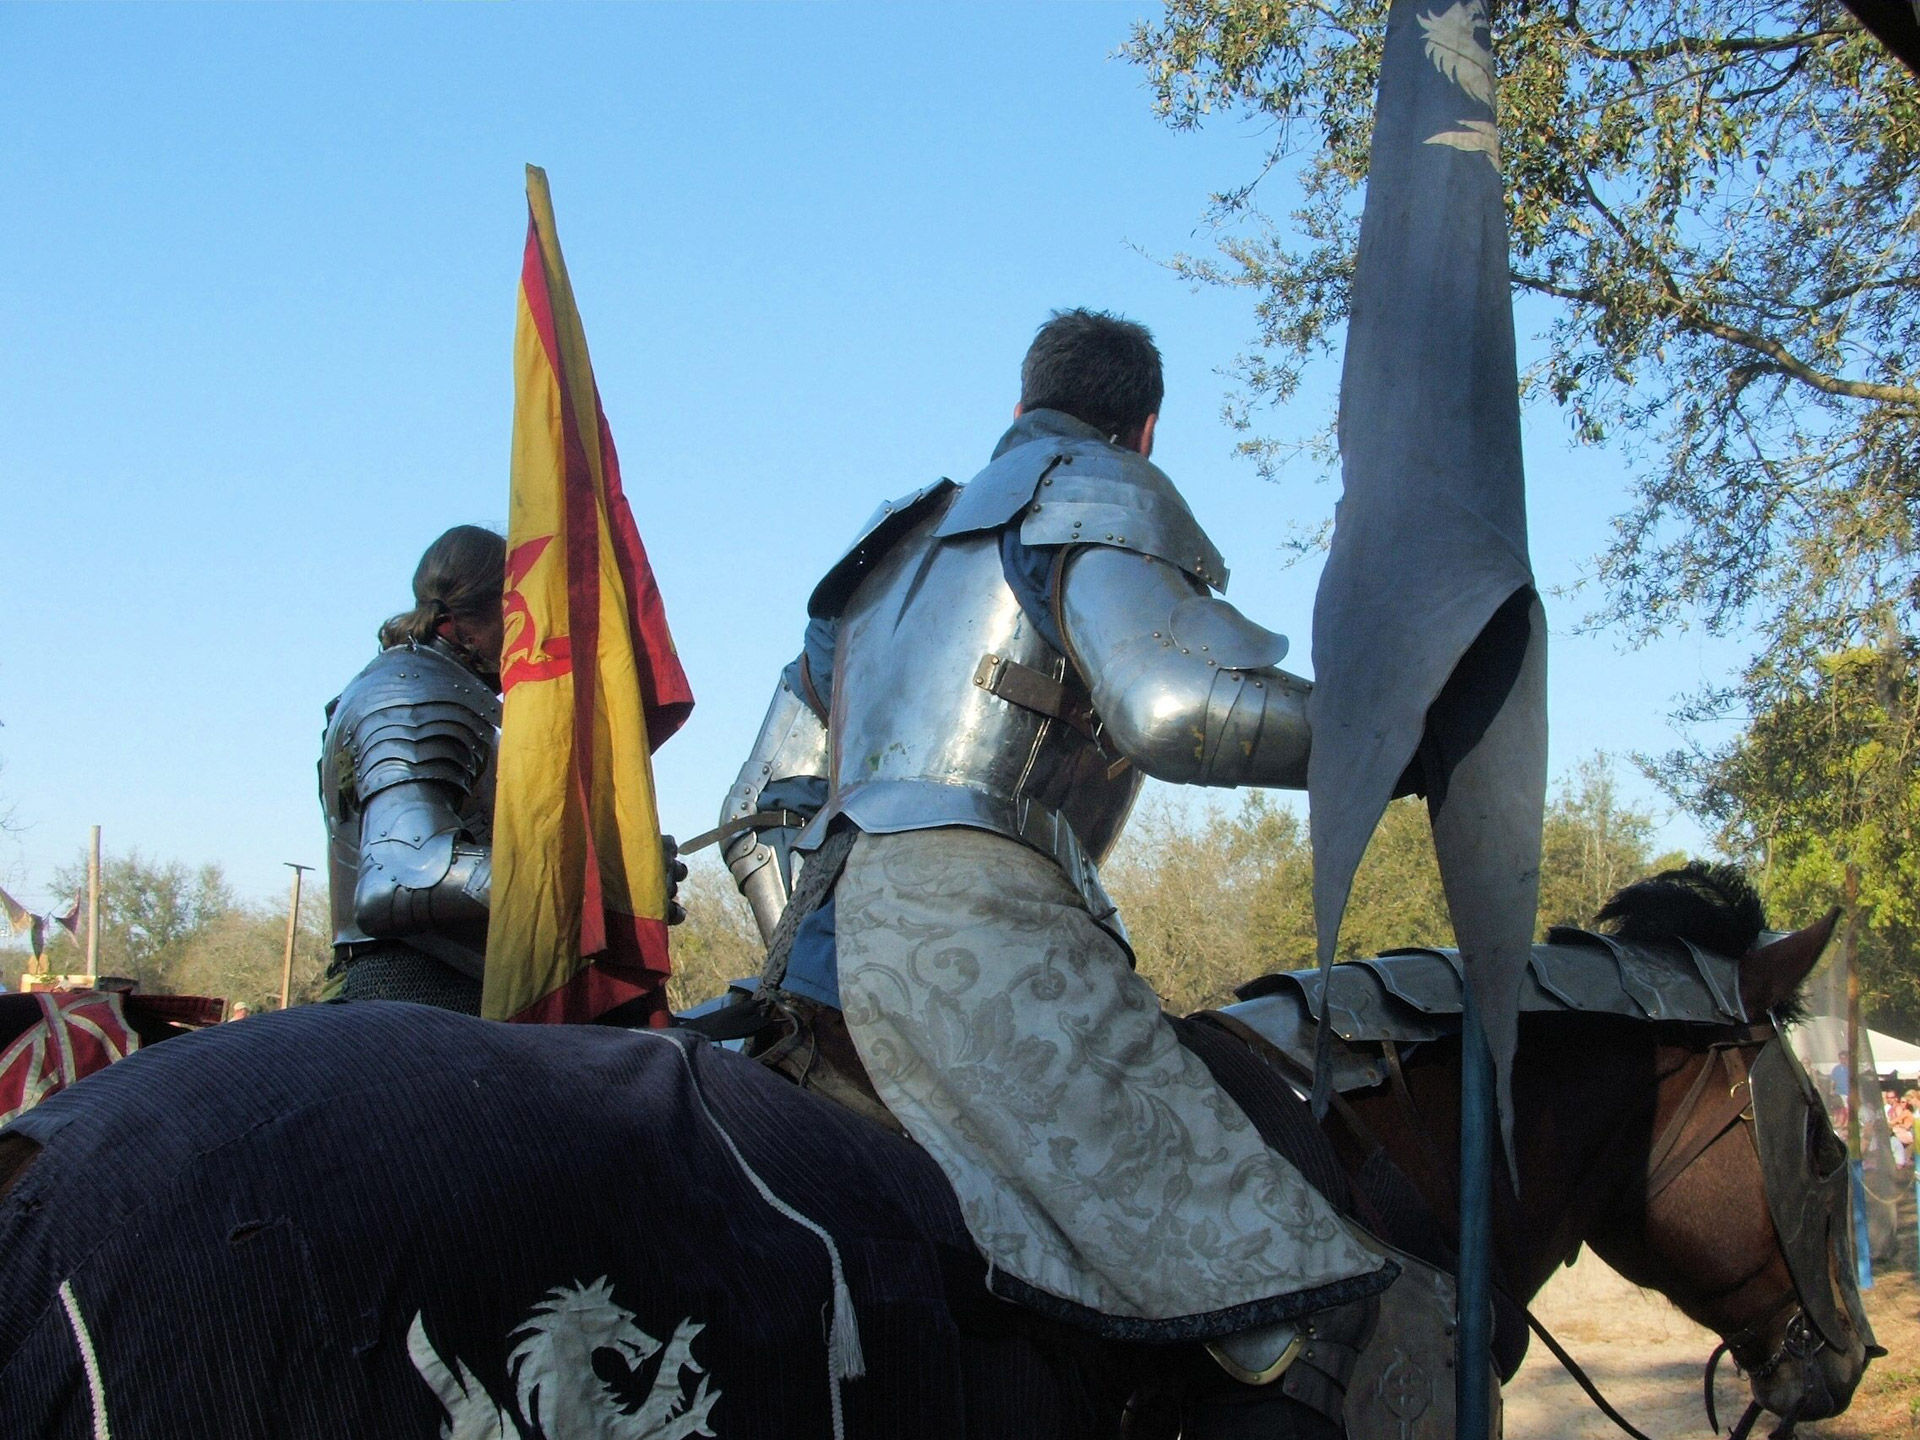 medieval joust knight free photo